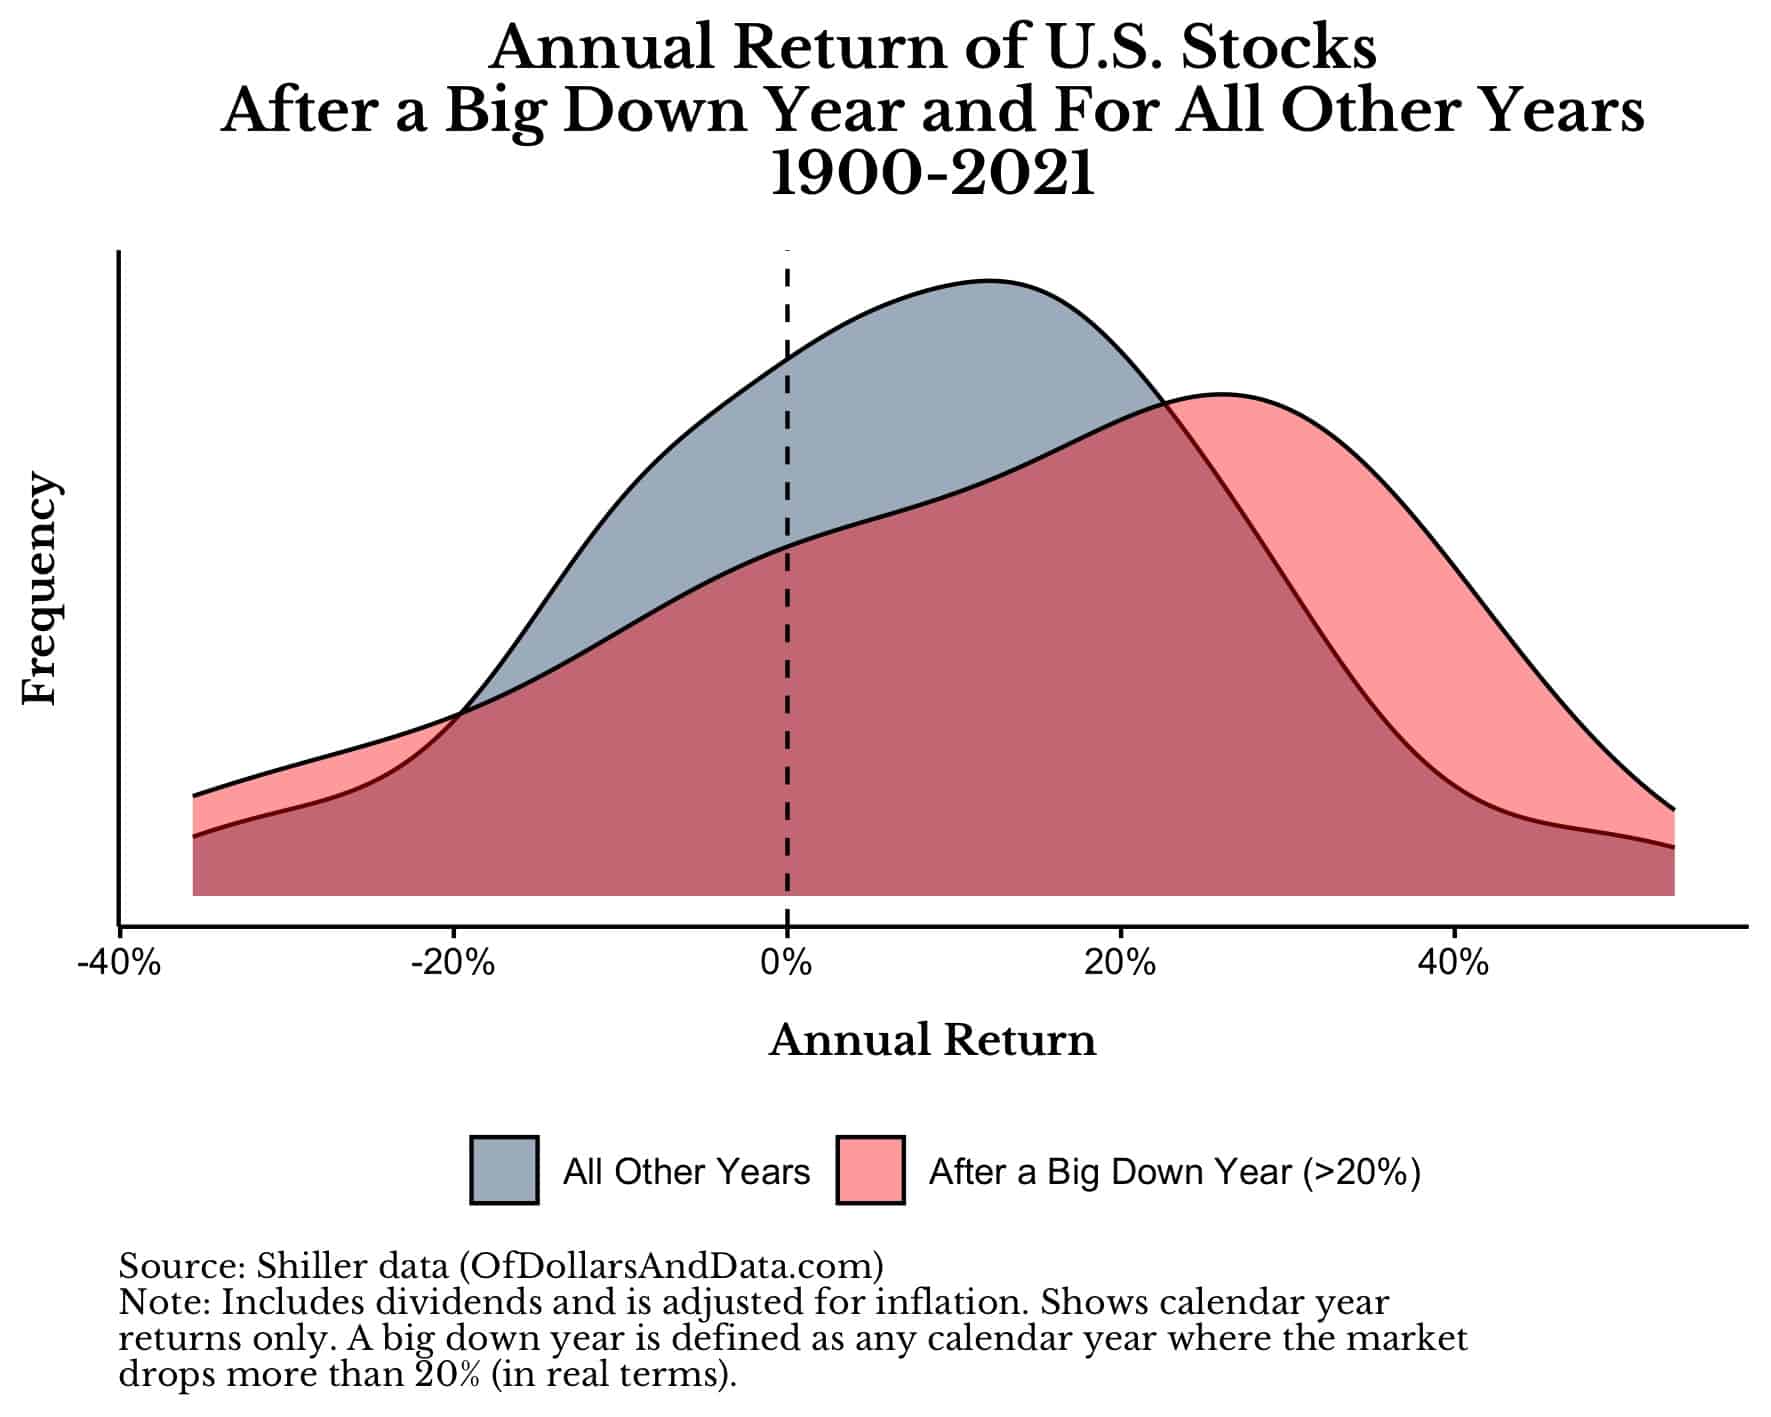 Annual return distribution of US stocks after a big down year and for all other years, 1900-2021